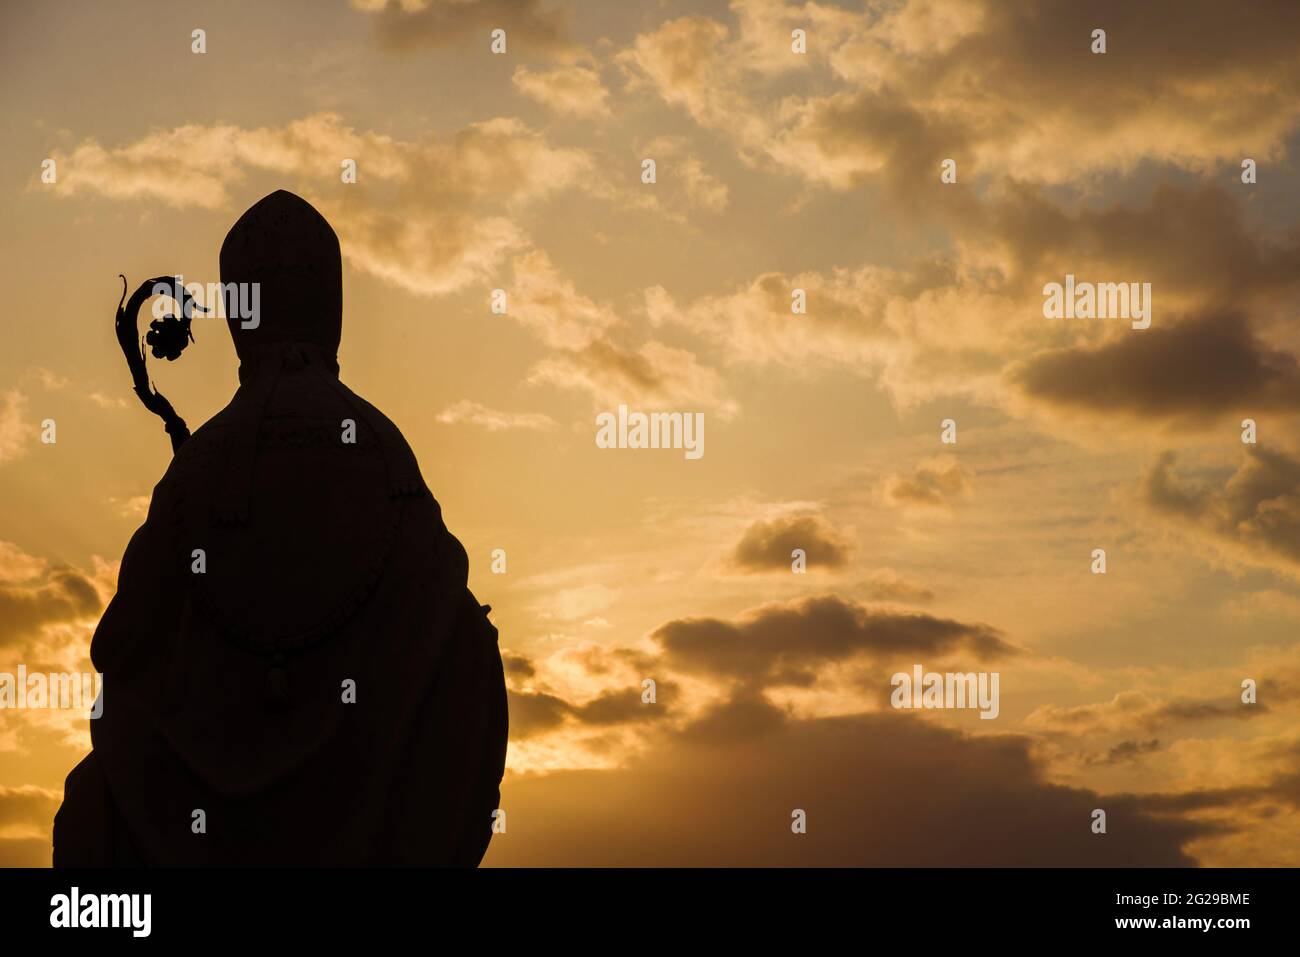 Christian Religion and Spirituality. Bishop ancient statue silhouette with crosier against a sunset sky Stock Photo